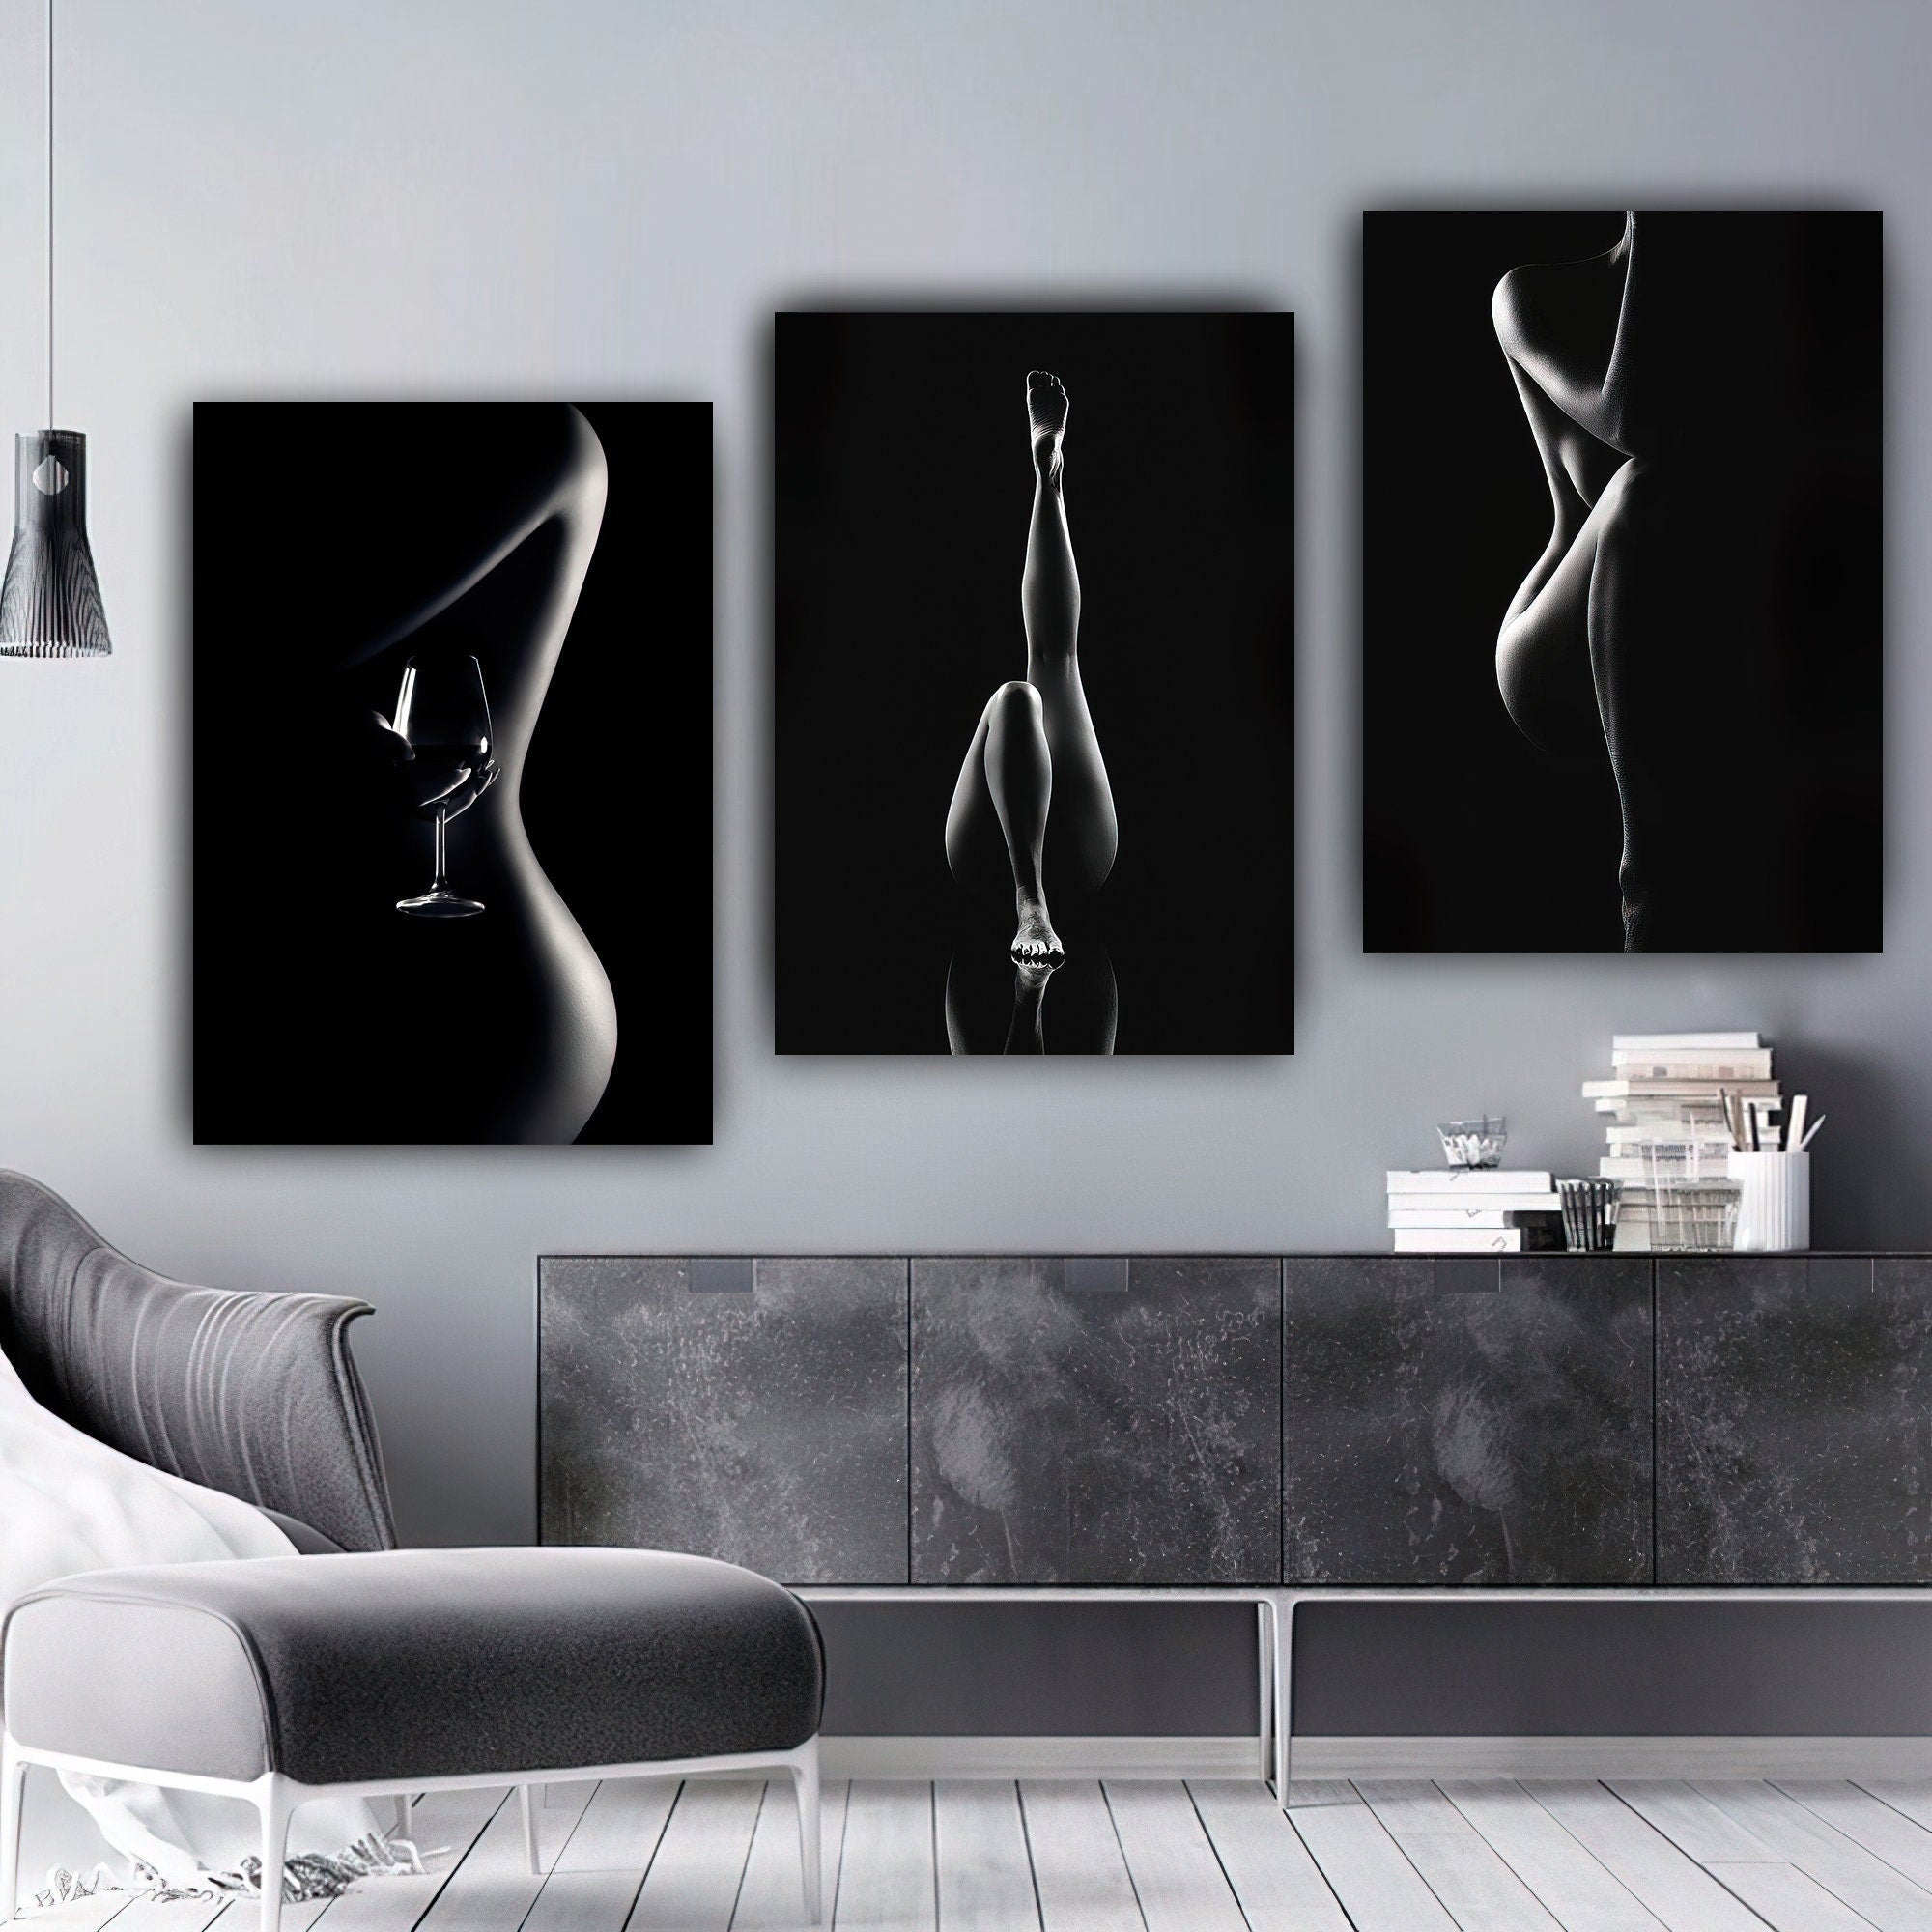 sexy woman black and white canvas painting, nude woman wall art,erotic woman canvas painting, painting for bedroom, woman canvas painting